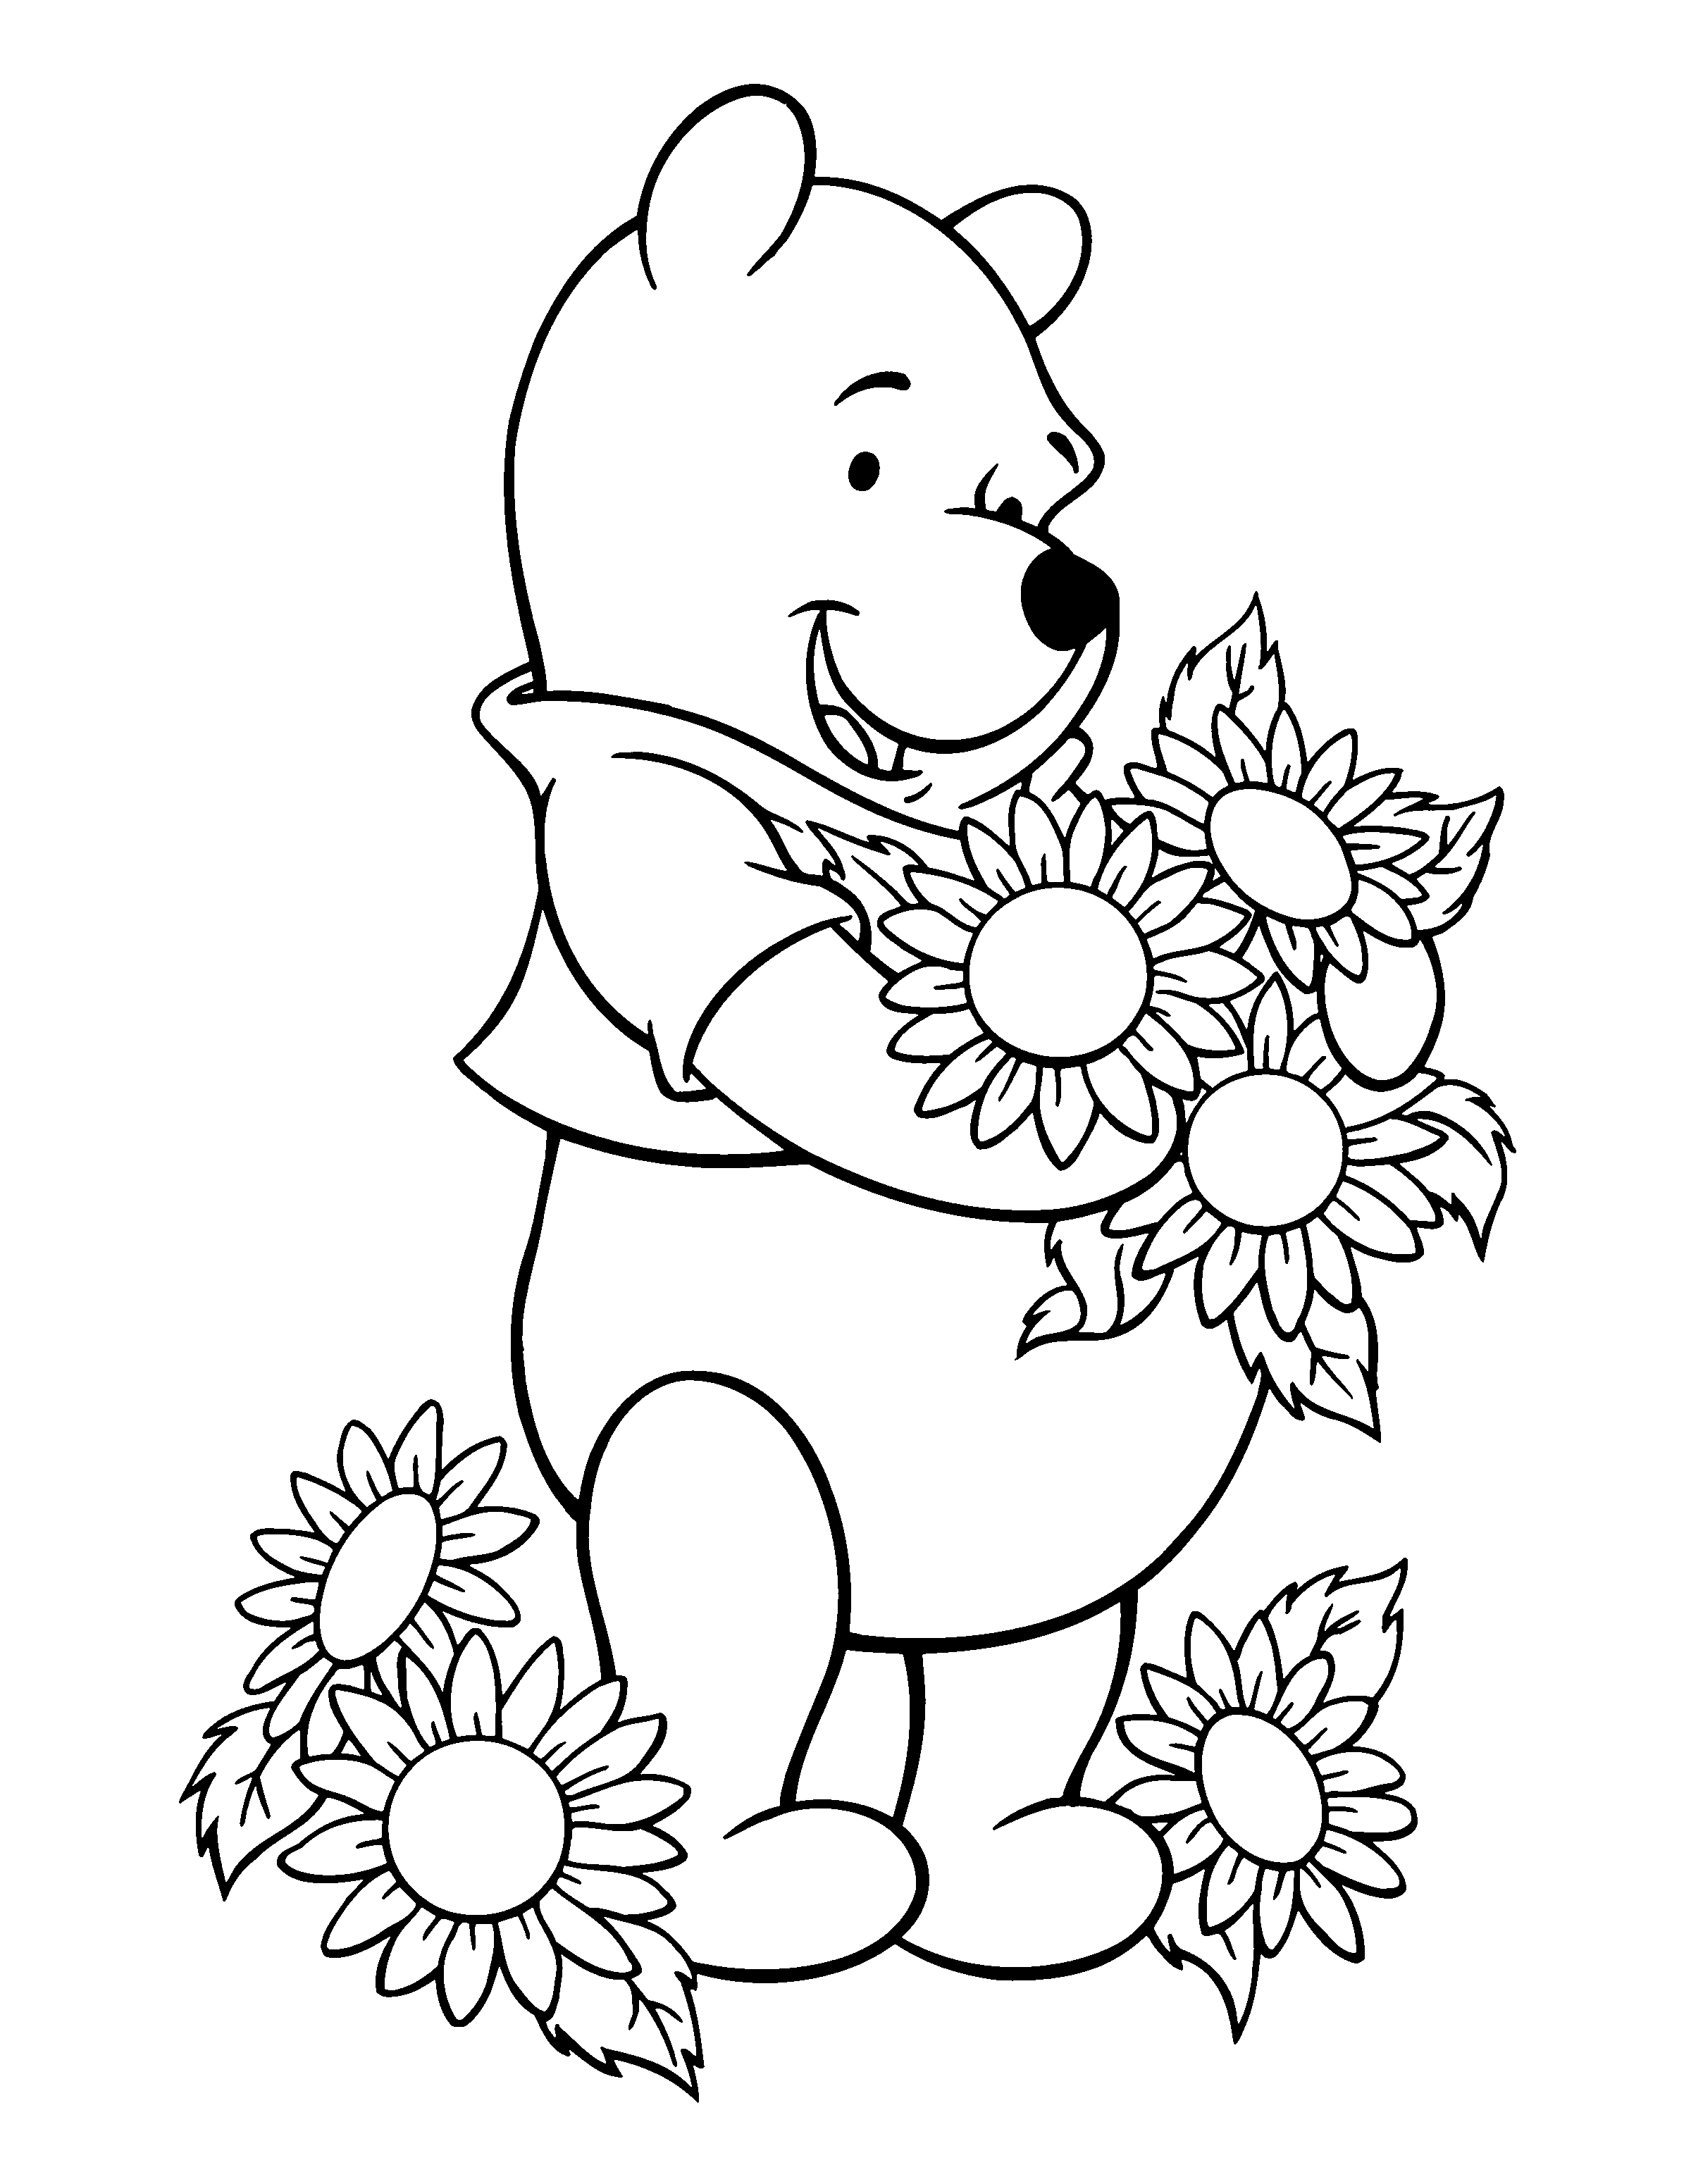 winnie-the-pooh-coloring-pages-12-coloring-kids-coloring-kids